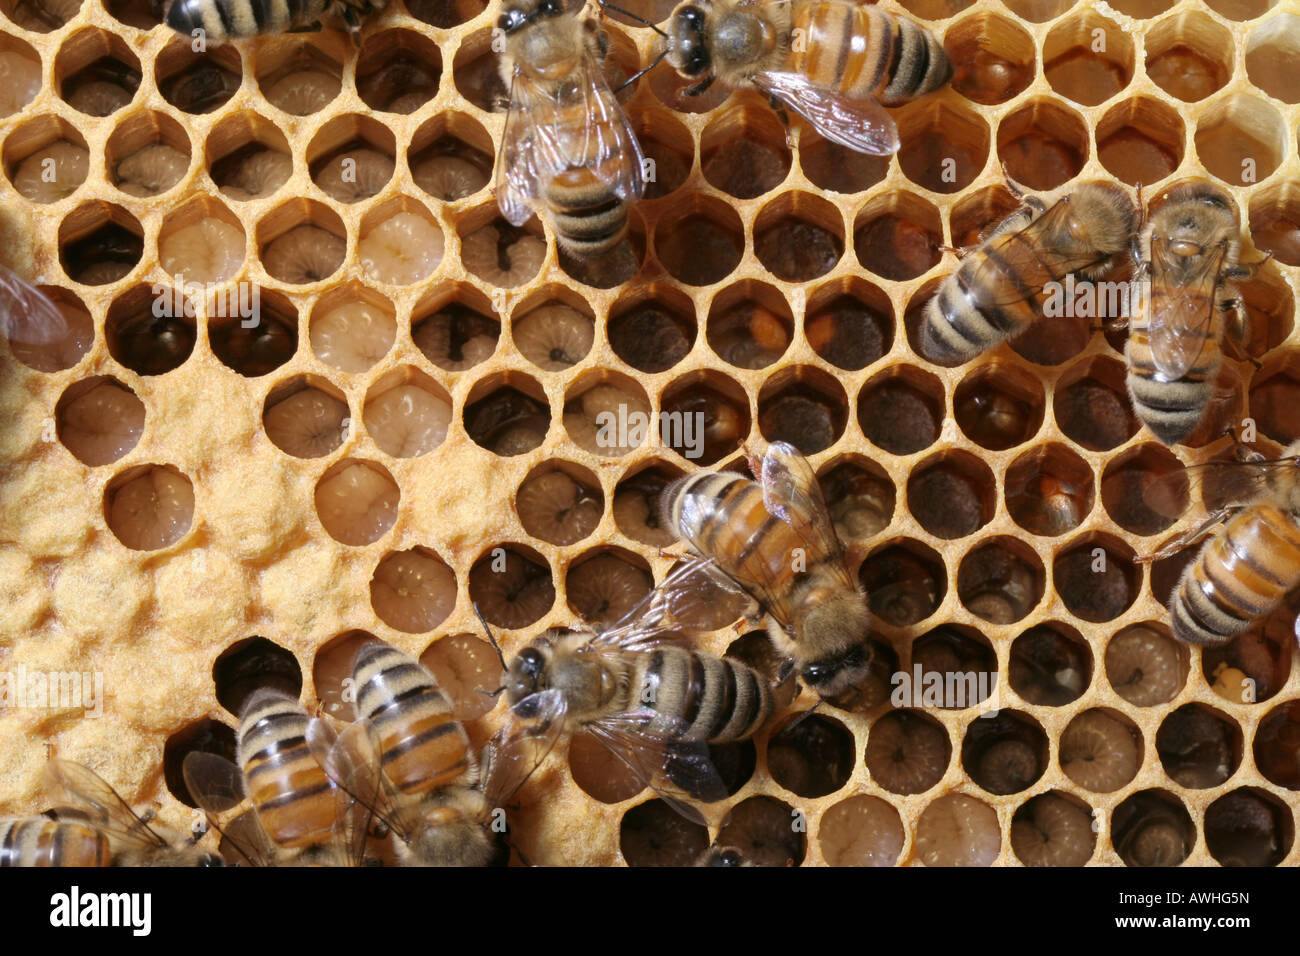 Honeybees in a hive with larvae at various stages of development and pupae Stock Photo